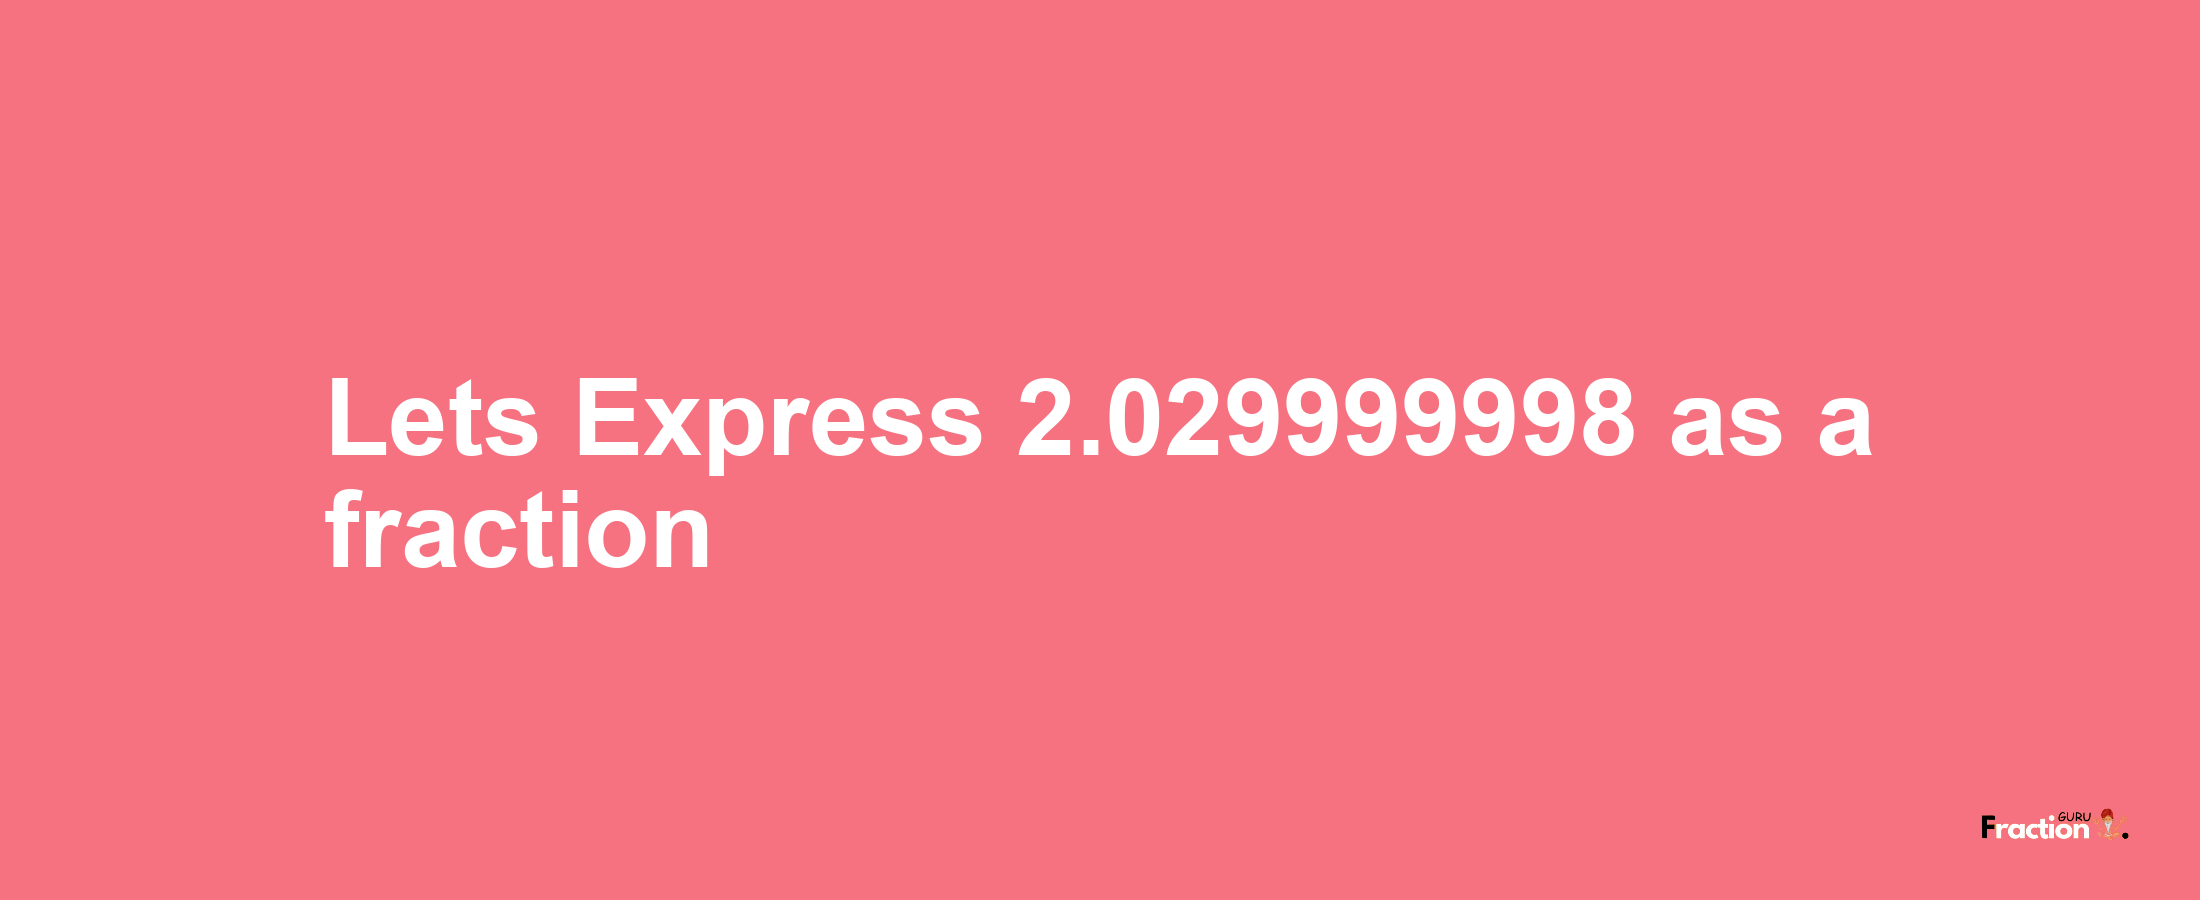 Lets Express 2.029999998 as afraction